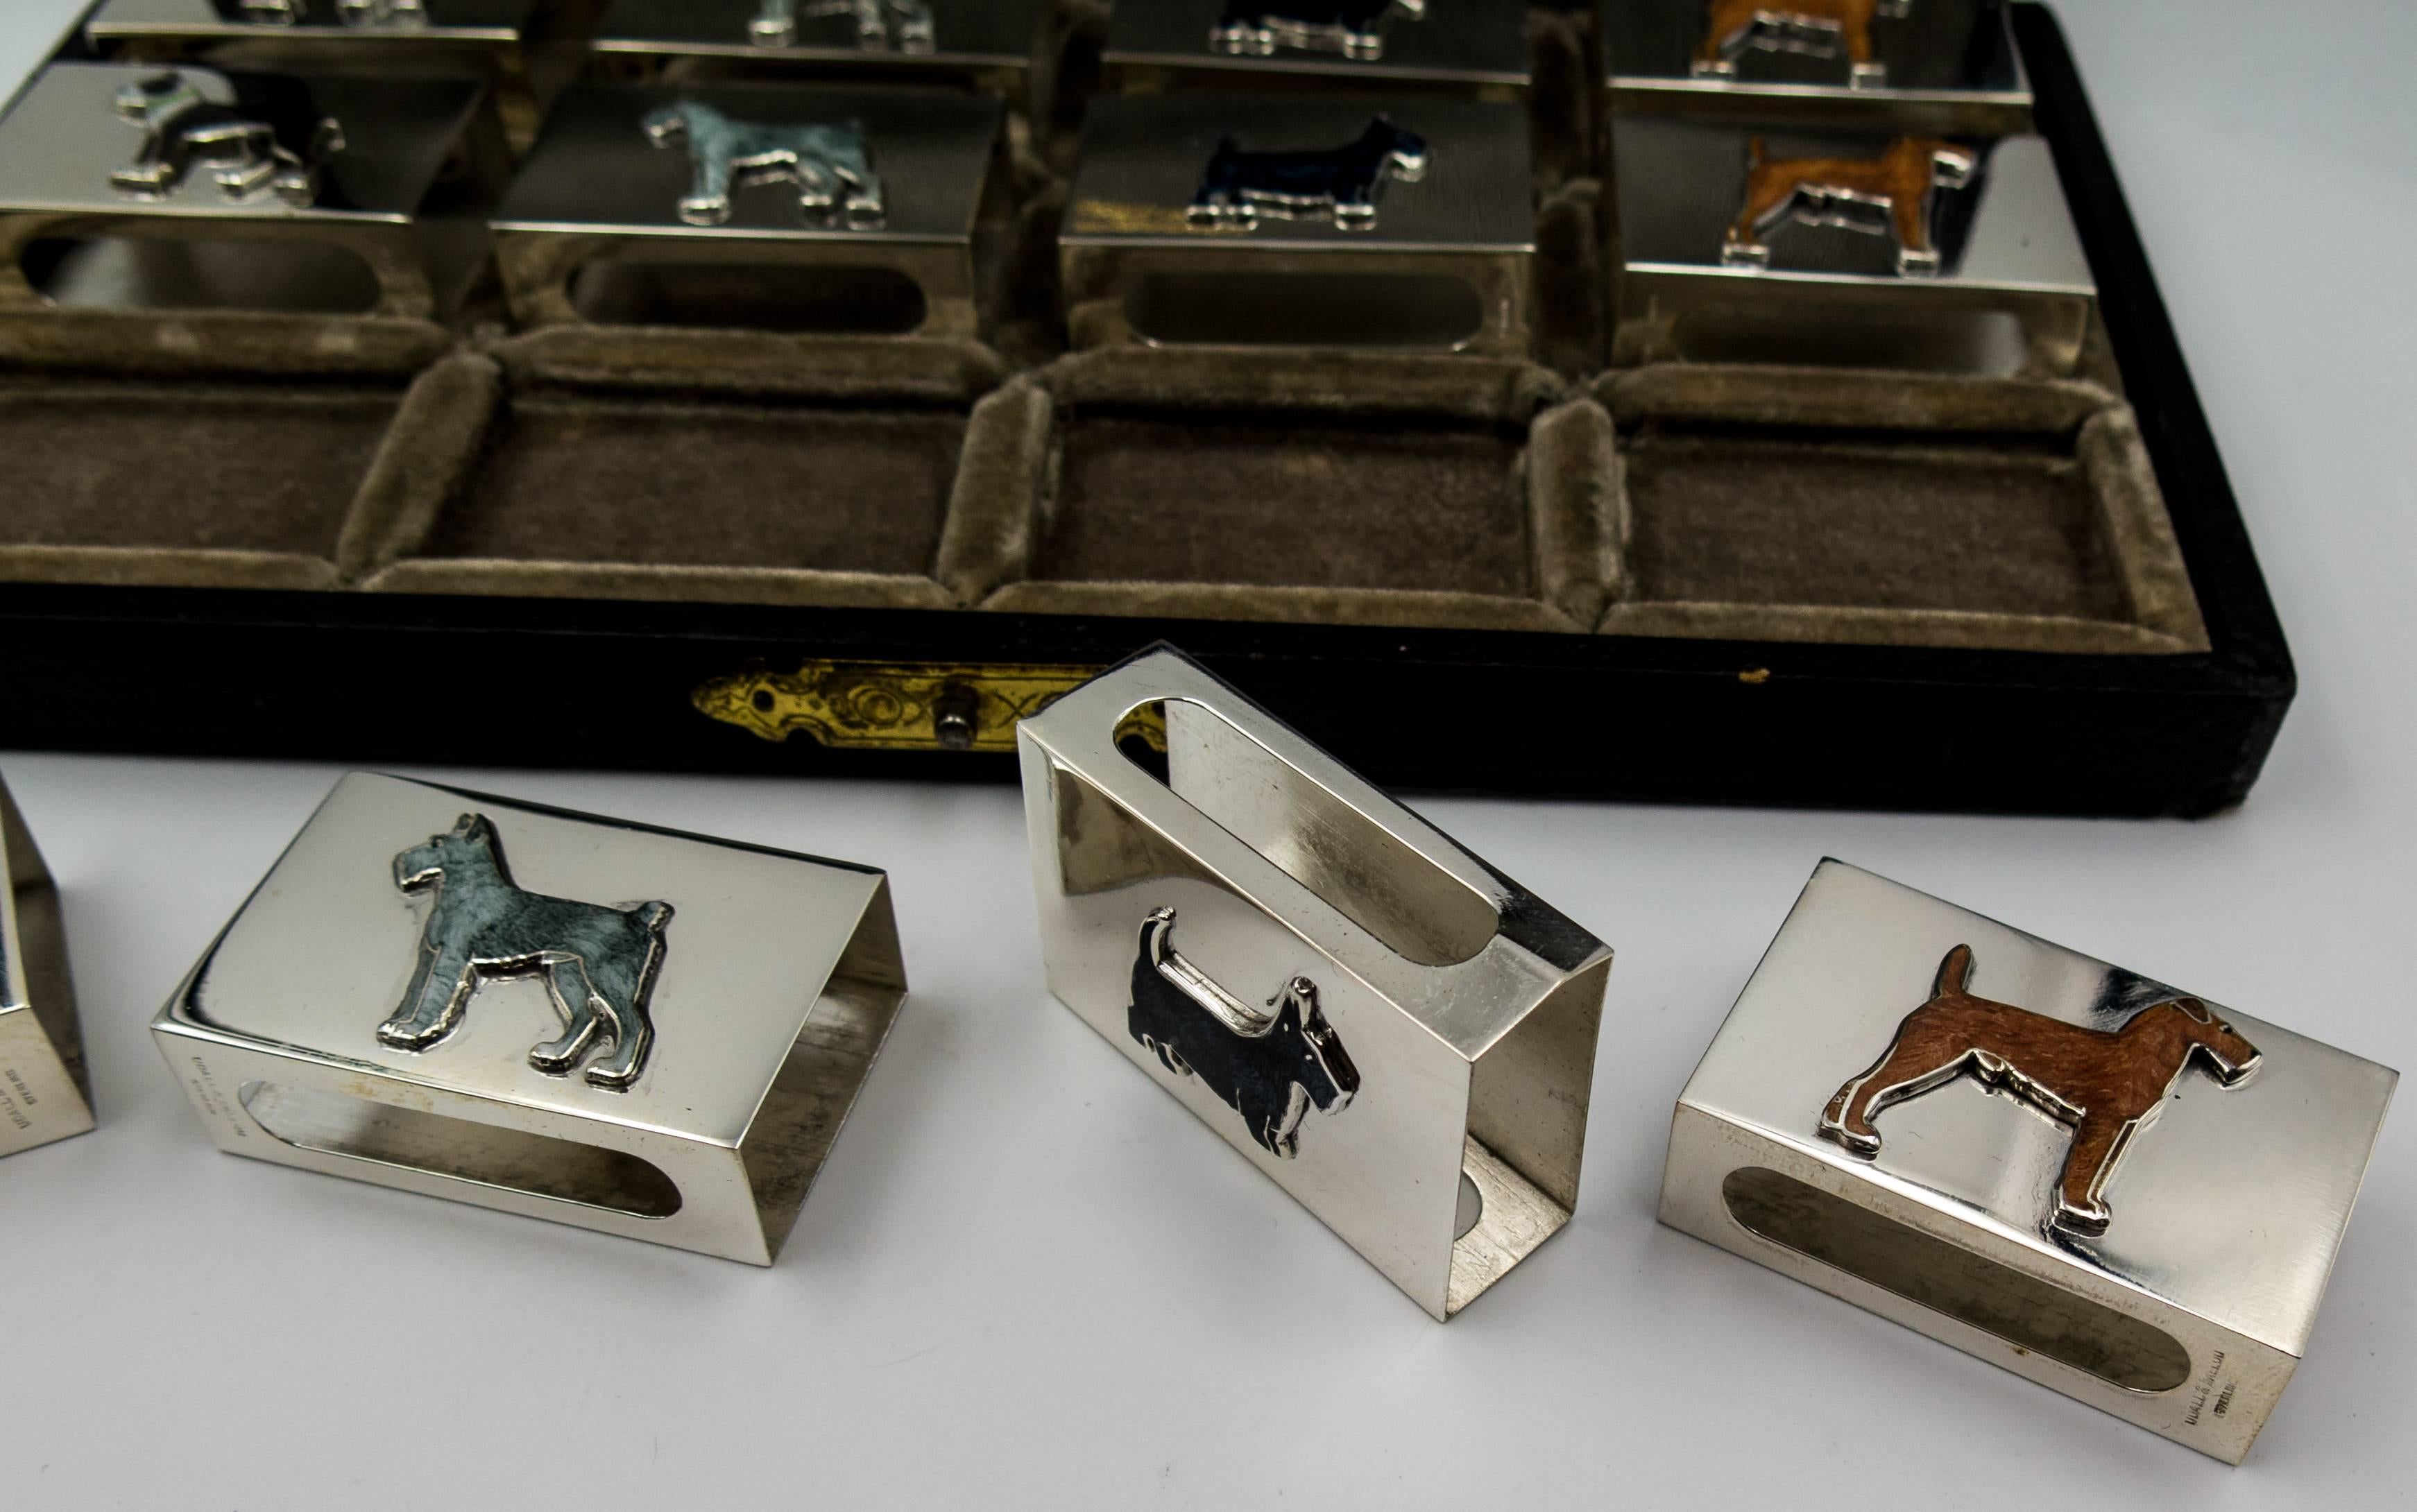   An elegant jewel for the desk or dinner table, this unusual item consists of 12 individual matchbox holders crafted in silver.  Nestled within the box are four  breeds of sporting dog, three matchboxes for each, all handpainted.  The boxer is